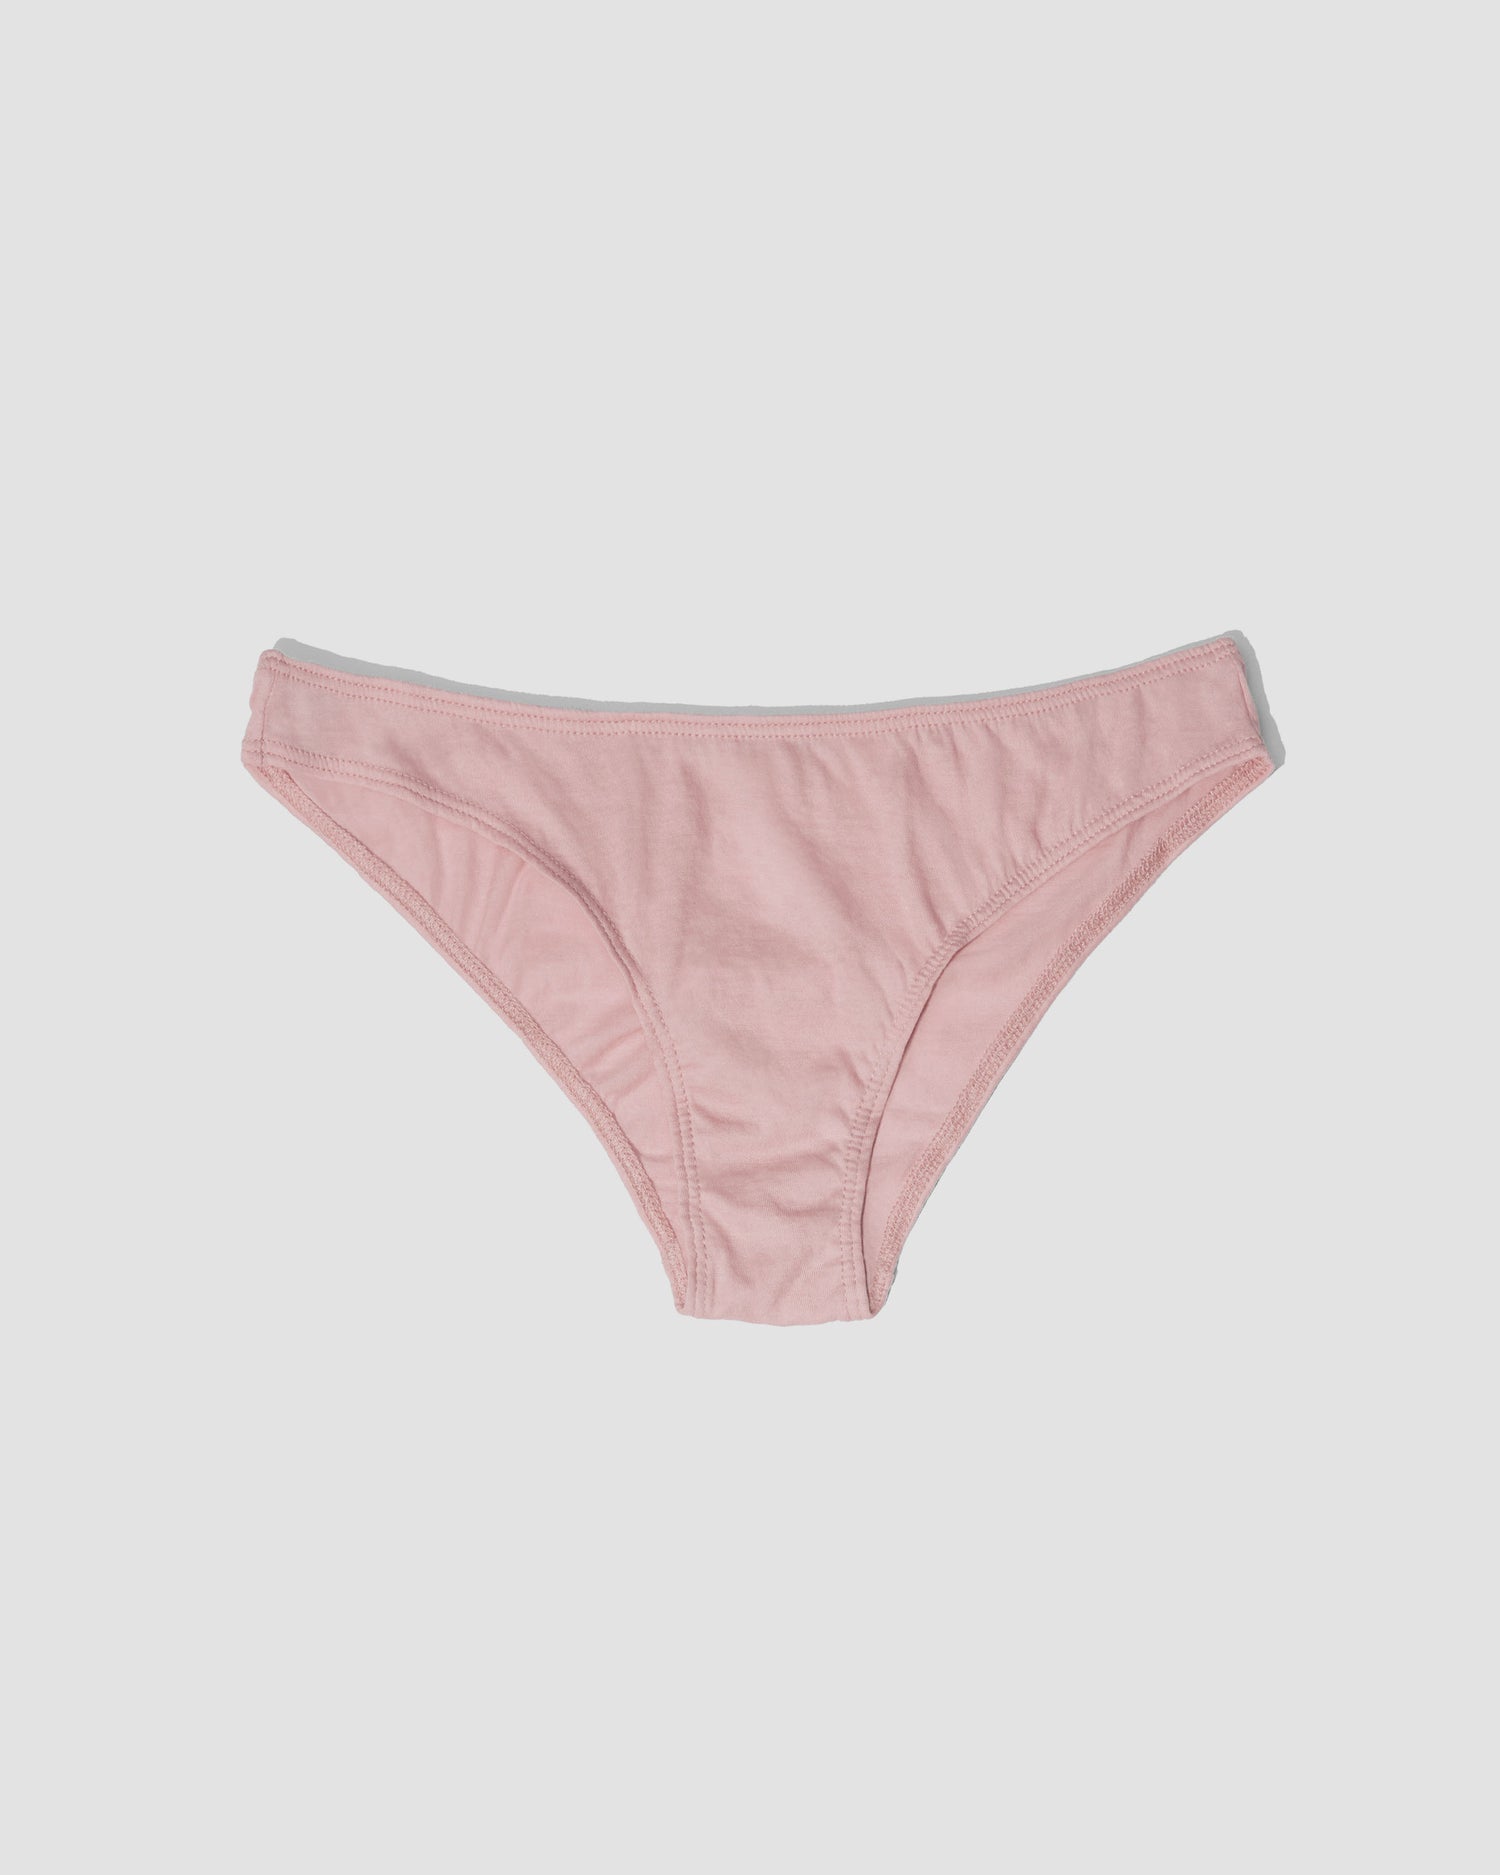 LBECLEY Cotton French Cut Panties for Women Underpants Patchwork